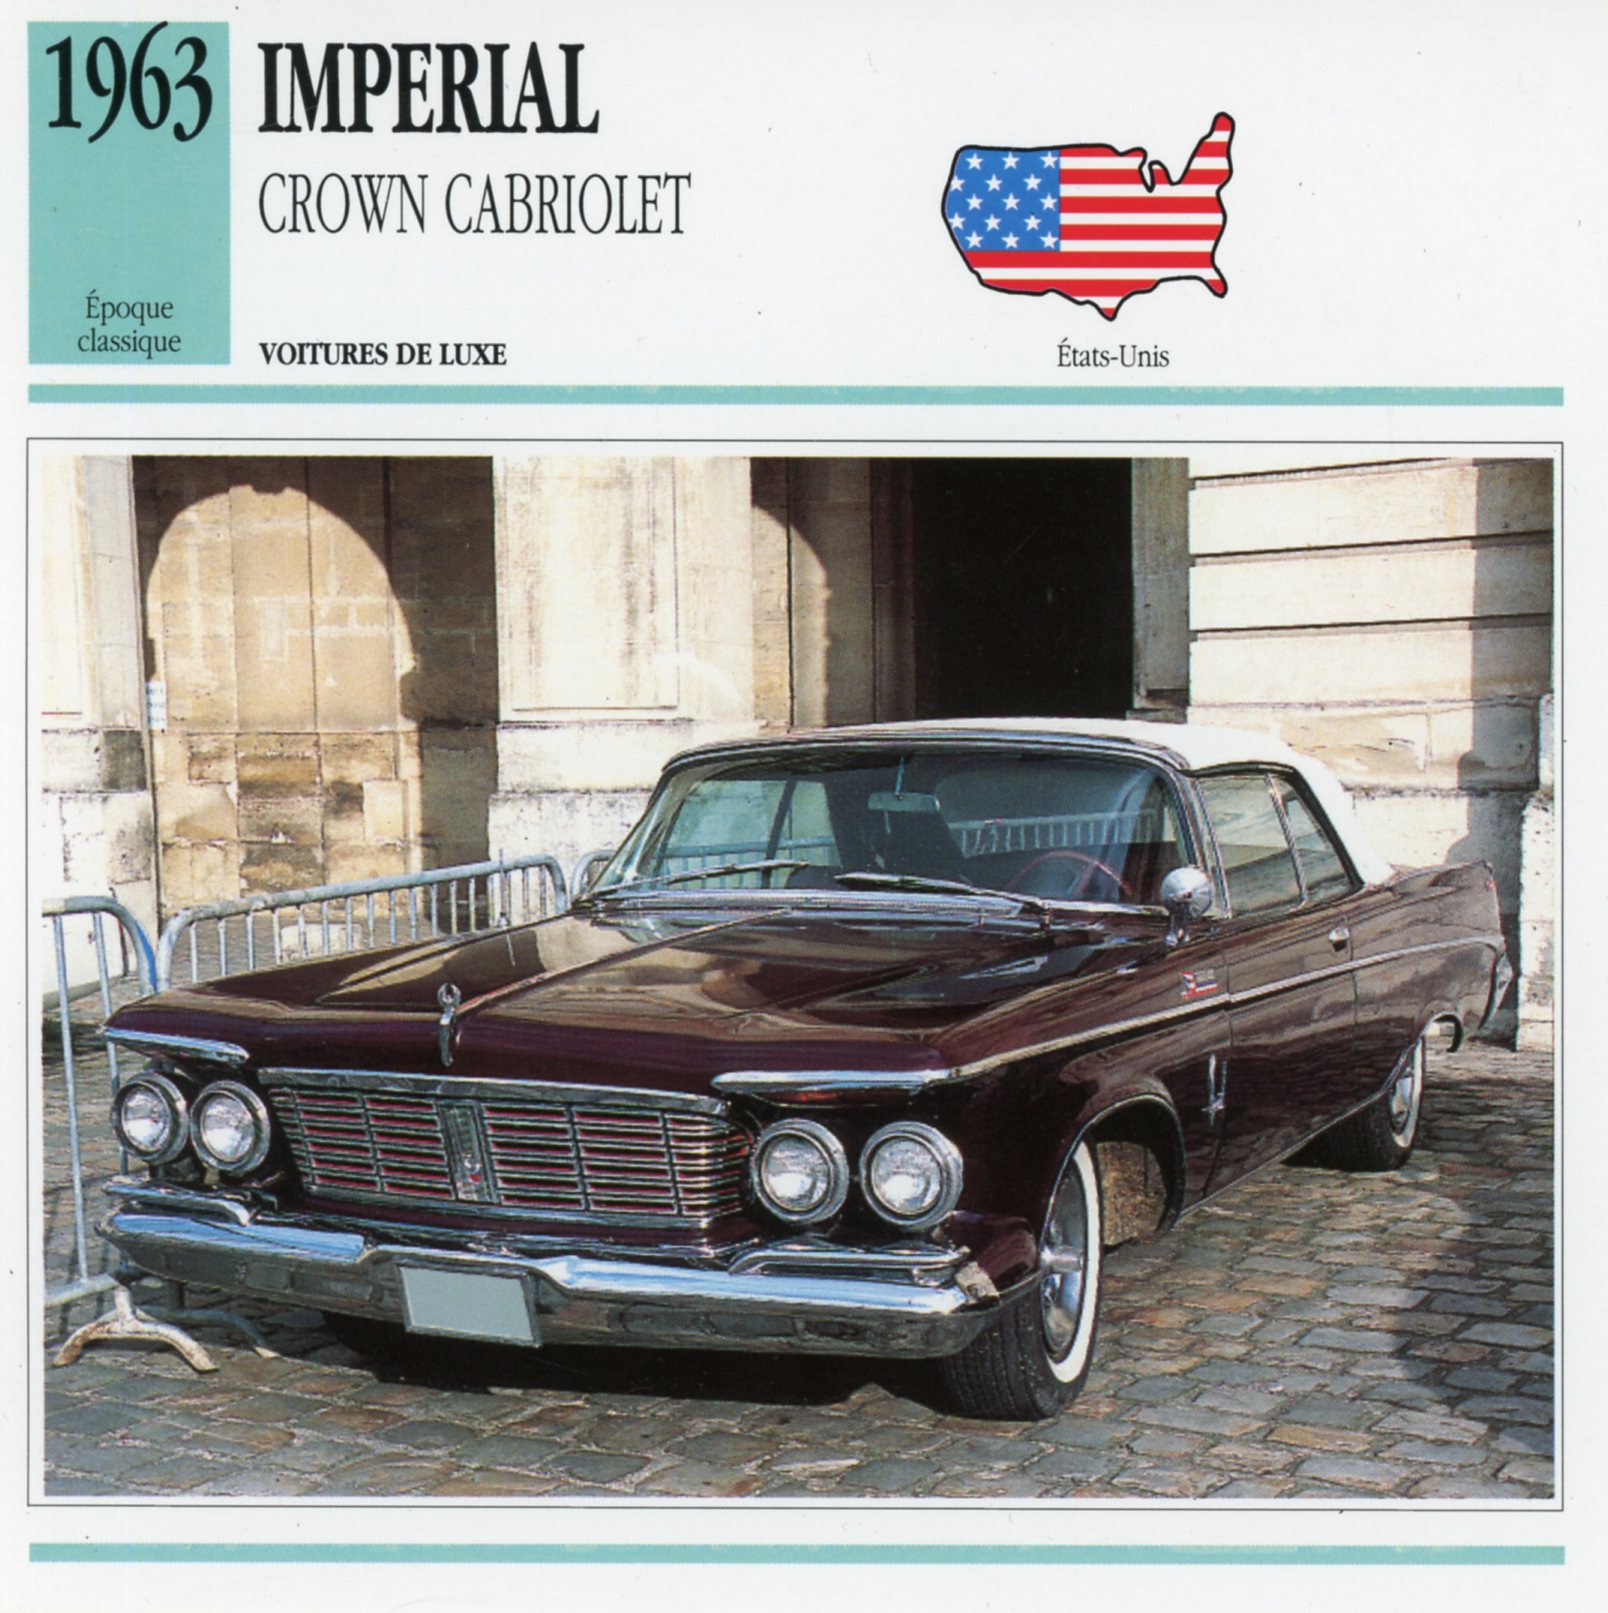 FICHE-AUTO-IMPERIAL-CROWN-CONVERTIBLE-LEMASTERBROCKERS-CARD-CARS-ATLAS